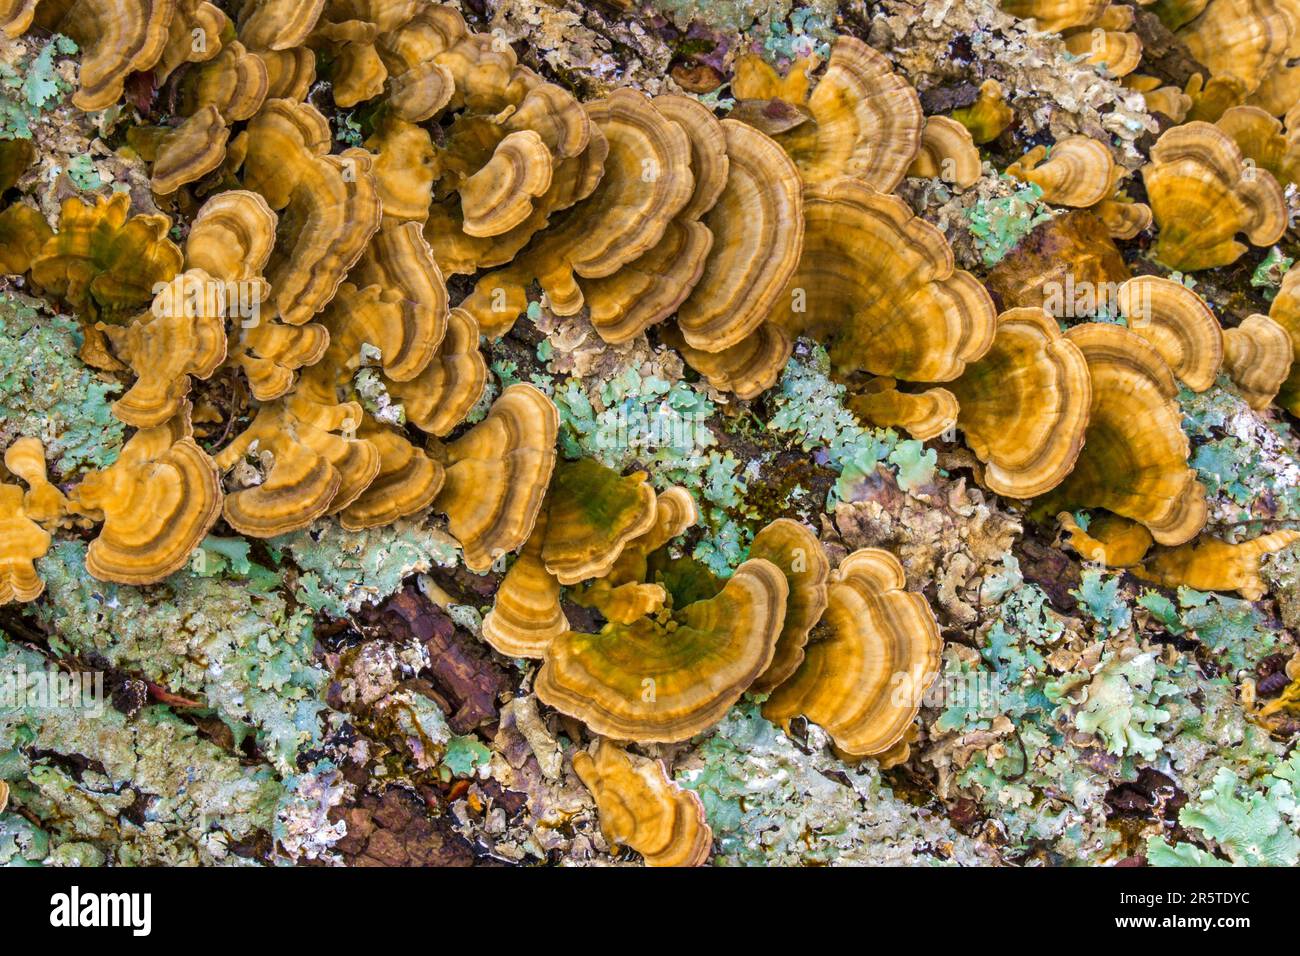 Turkey-tail fungus and Common Greenshield lichen growing on a dead fallen white ash tree truck Stock Photo